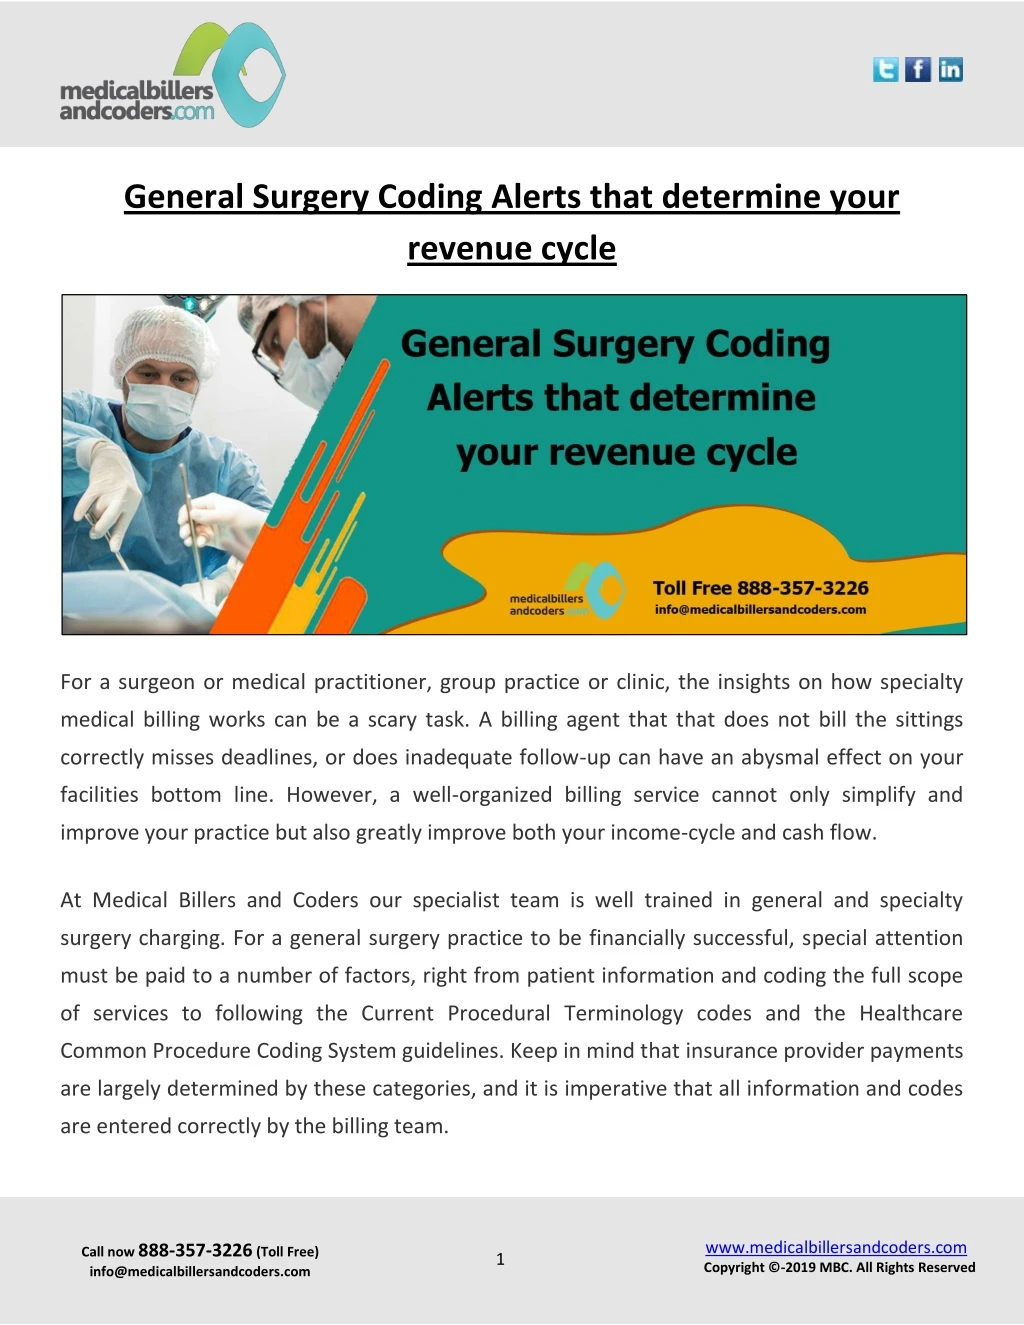 general surgery coding alerts that determine your